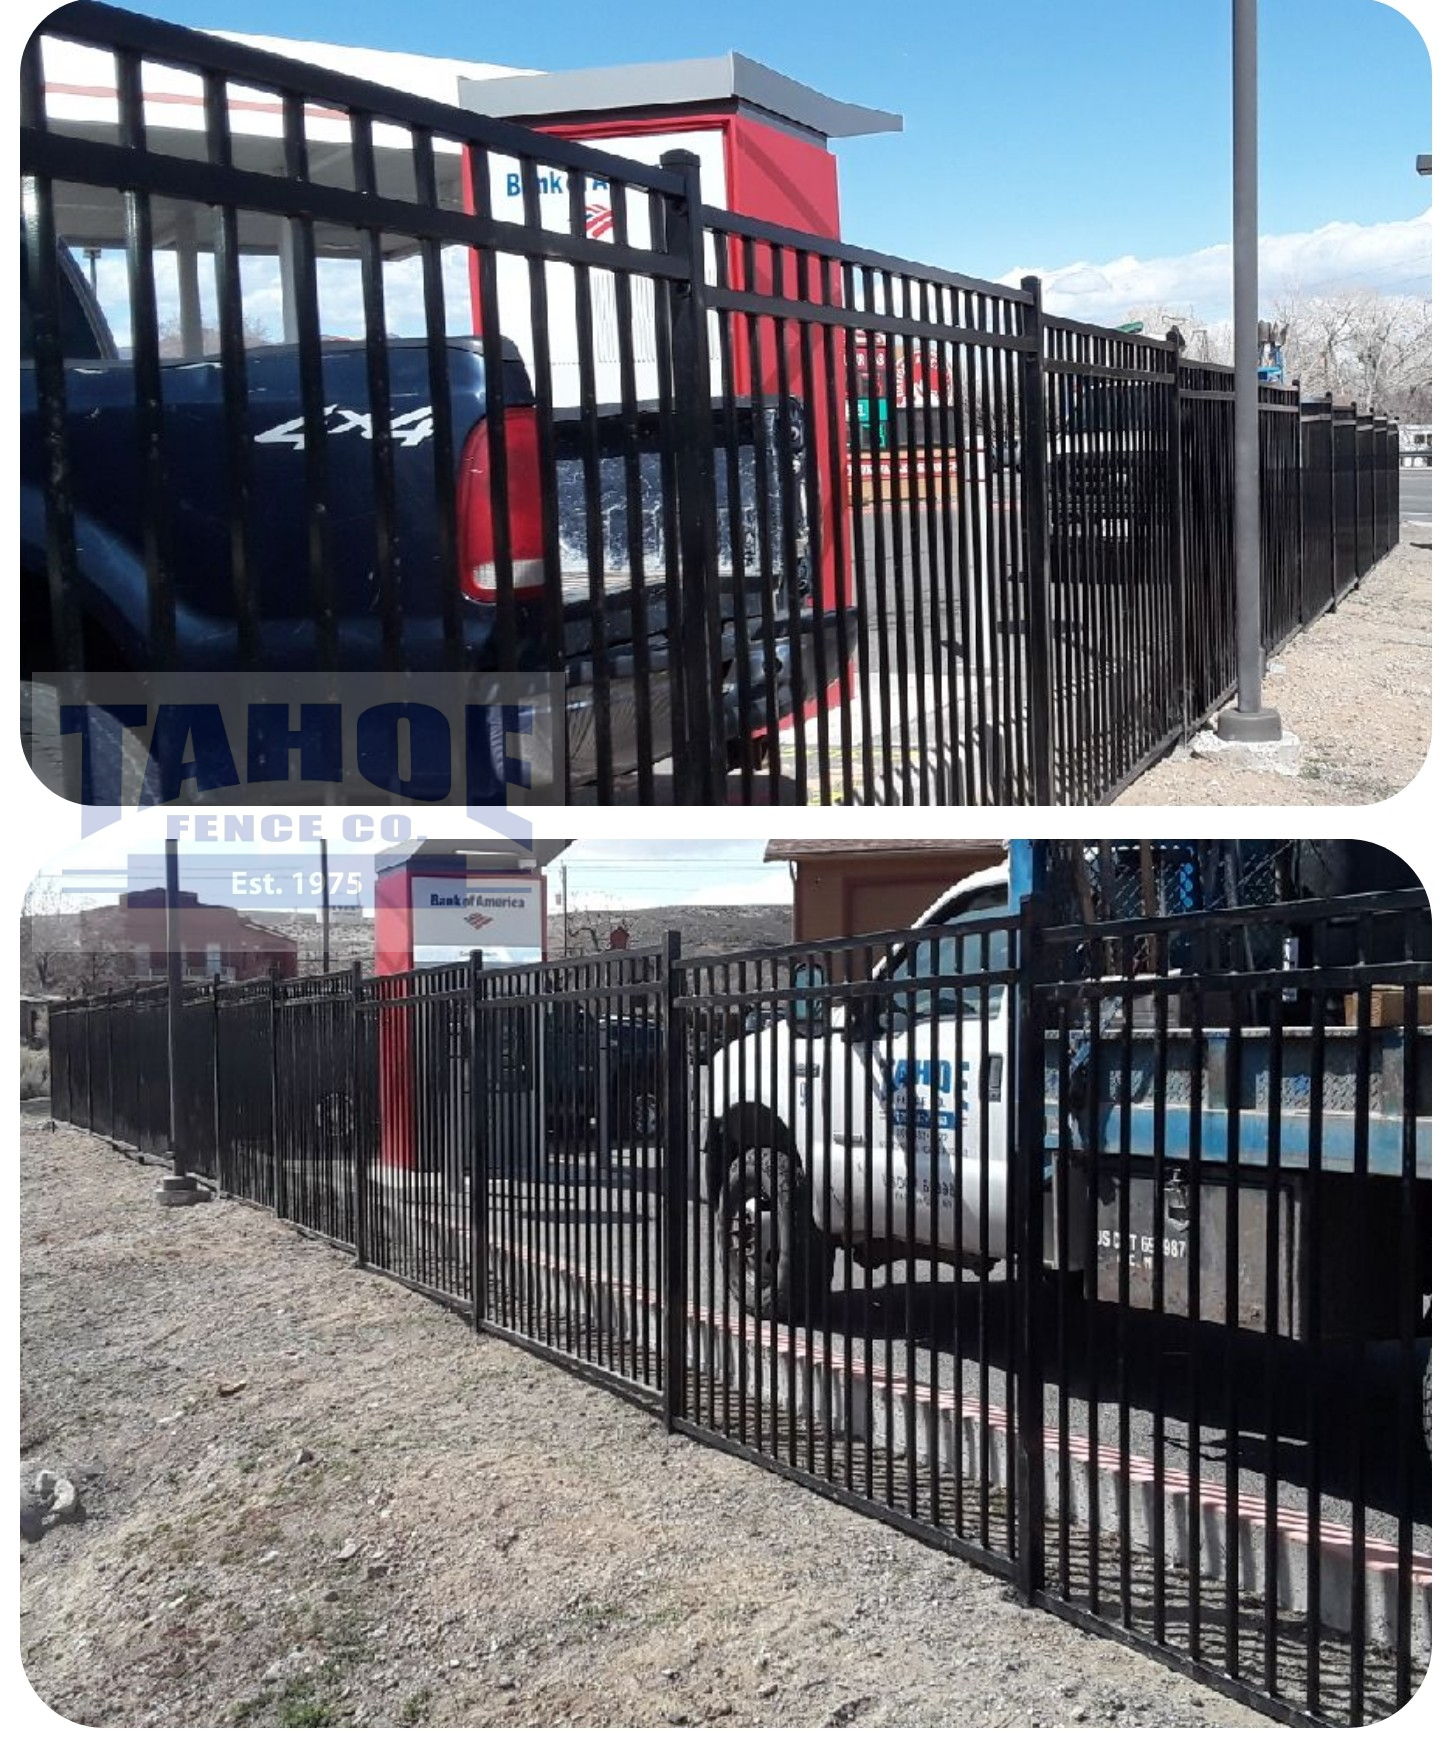  Similar to this 3-rail, ornamental steel fence Tahoe's crews installed in Dayton (Lyon County.) The posts & panels are pre-galvanized with a black, powder coat finish to increase the fence's durability.